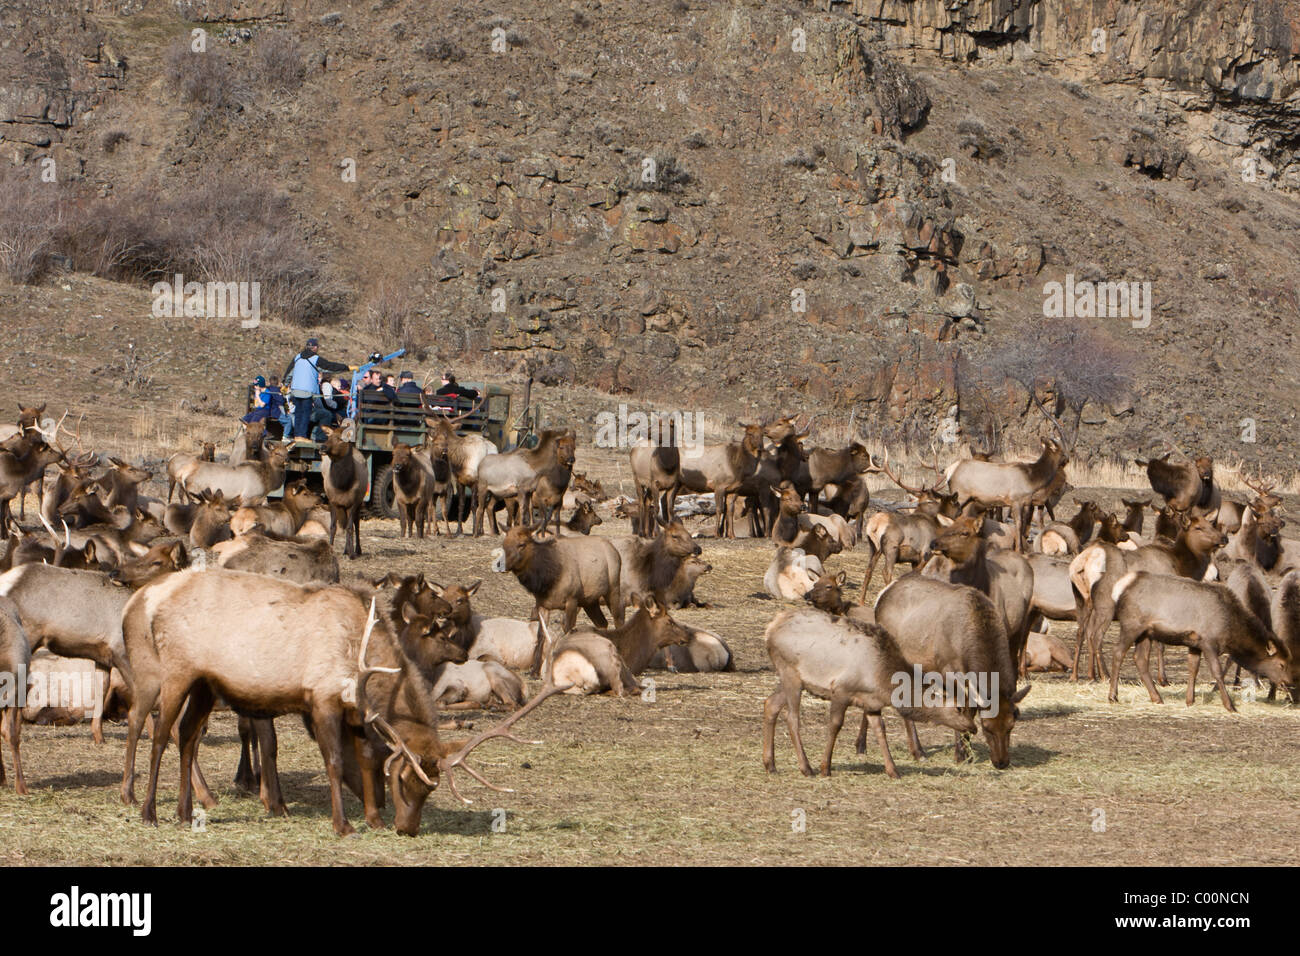 A tour truck takes visitors out closer to the herd of Rocky Mountain Elk at Oak Creek Wildlife Refuge near Naches, Washington. Stock Photo